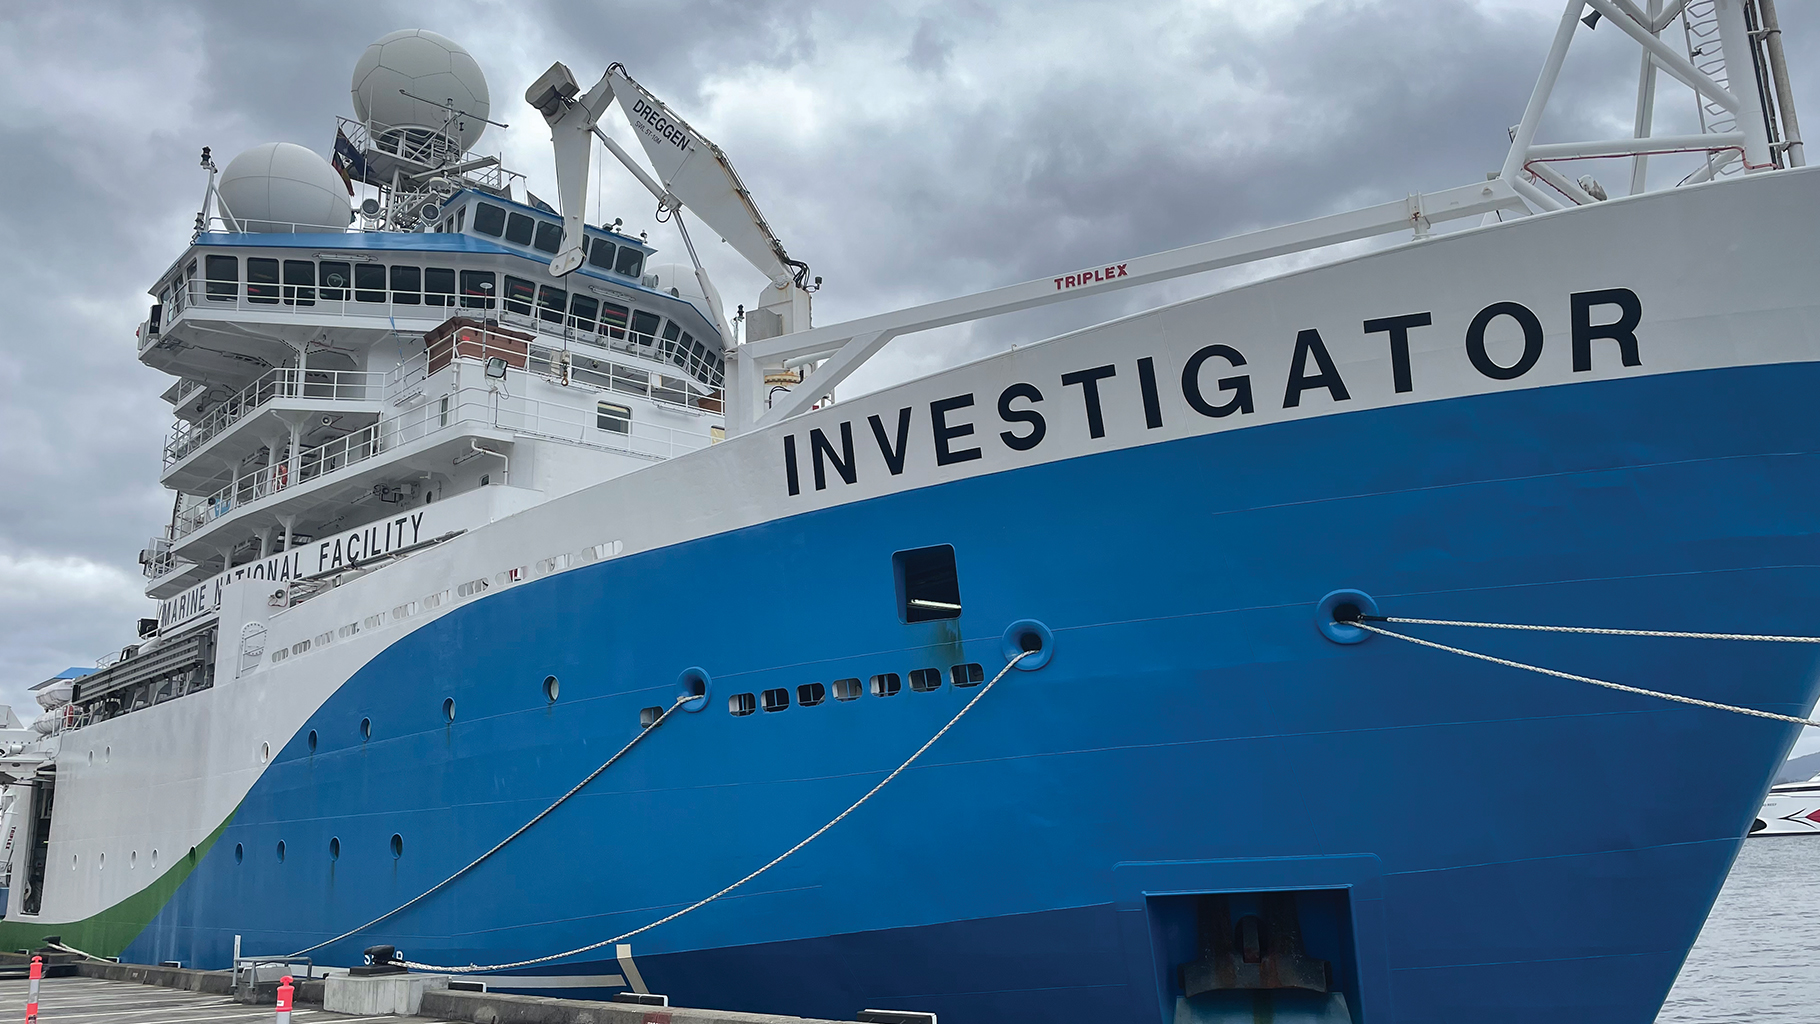 Scientists spent two months, and traveled over some 300,000 miles, aboard the Research Vessel Investigator.